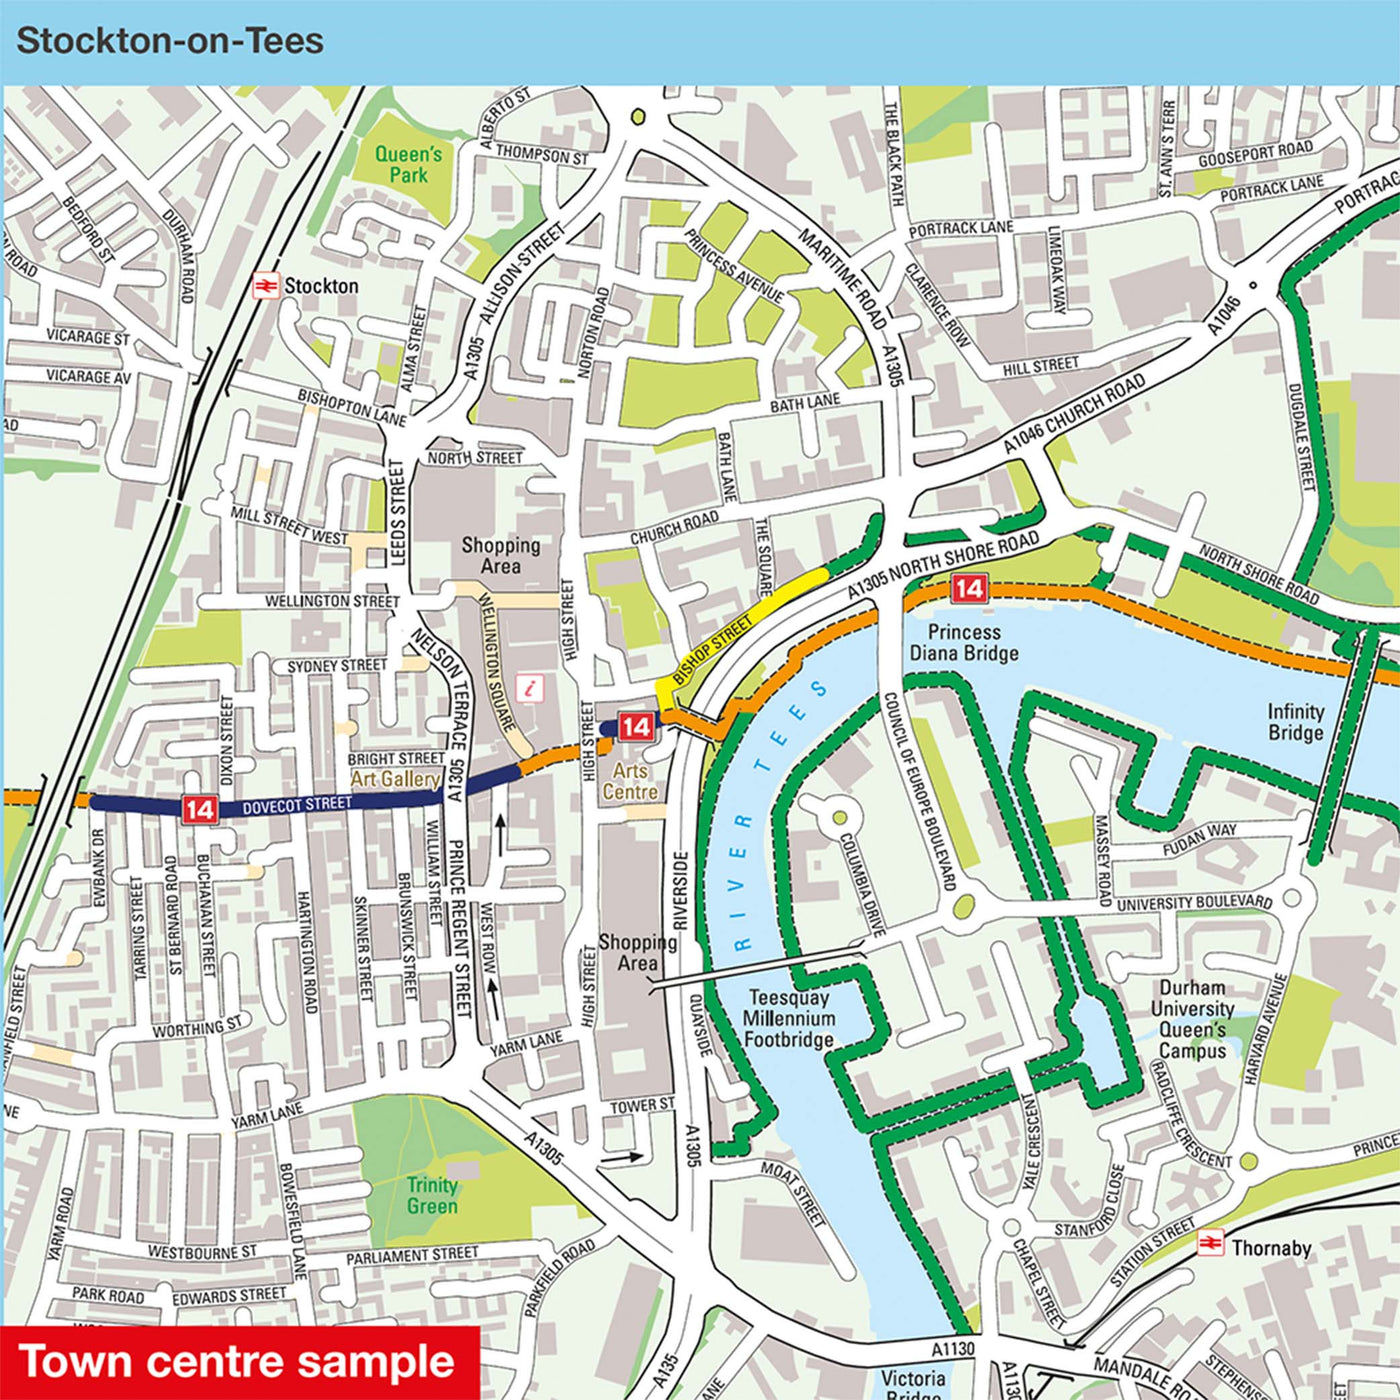 Town centre sample: Stockton-on-Tees, featuring route 14